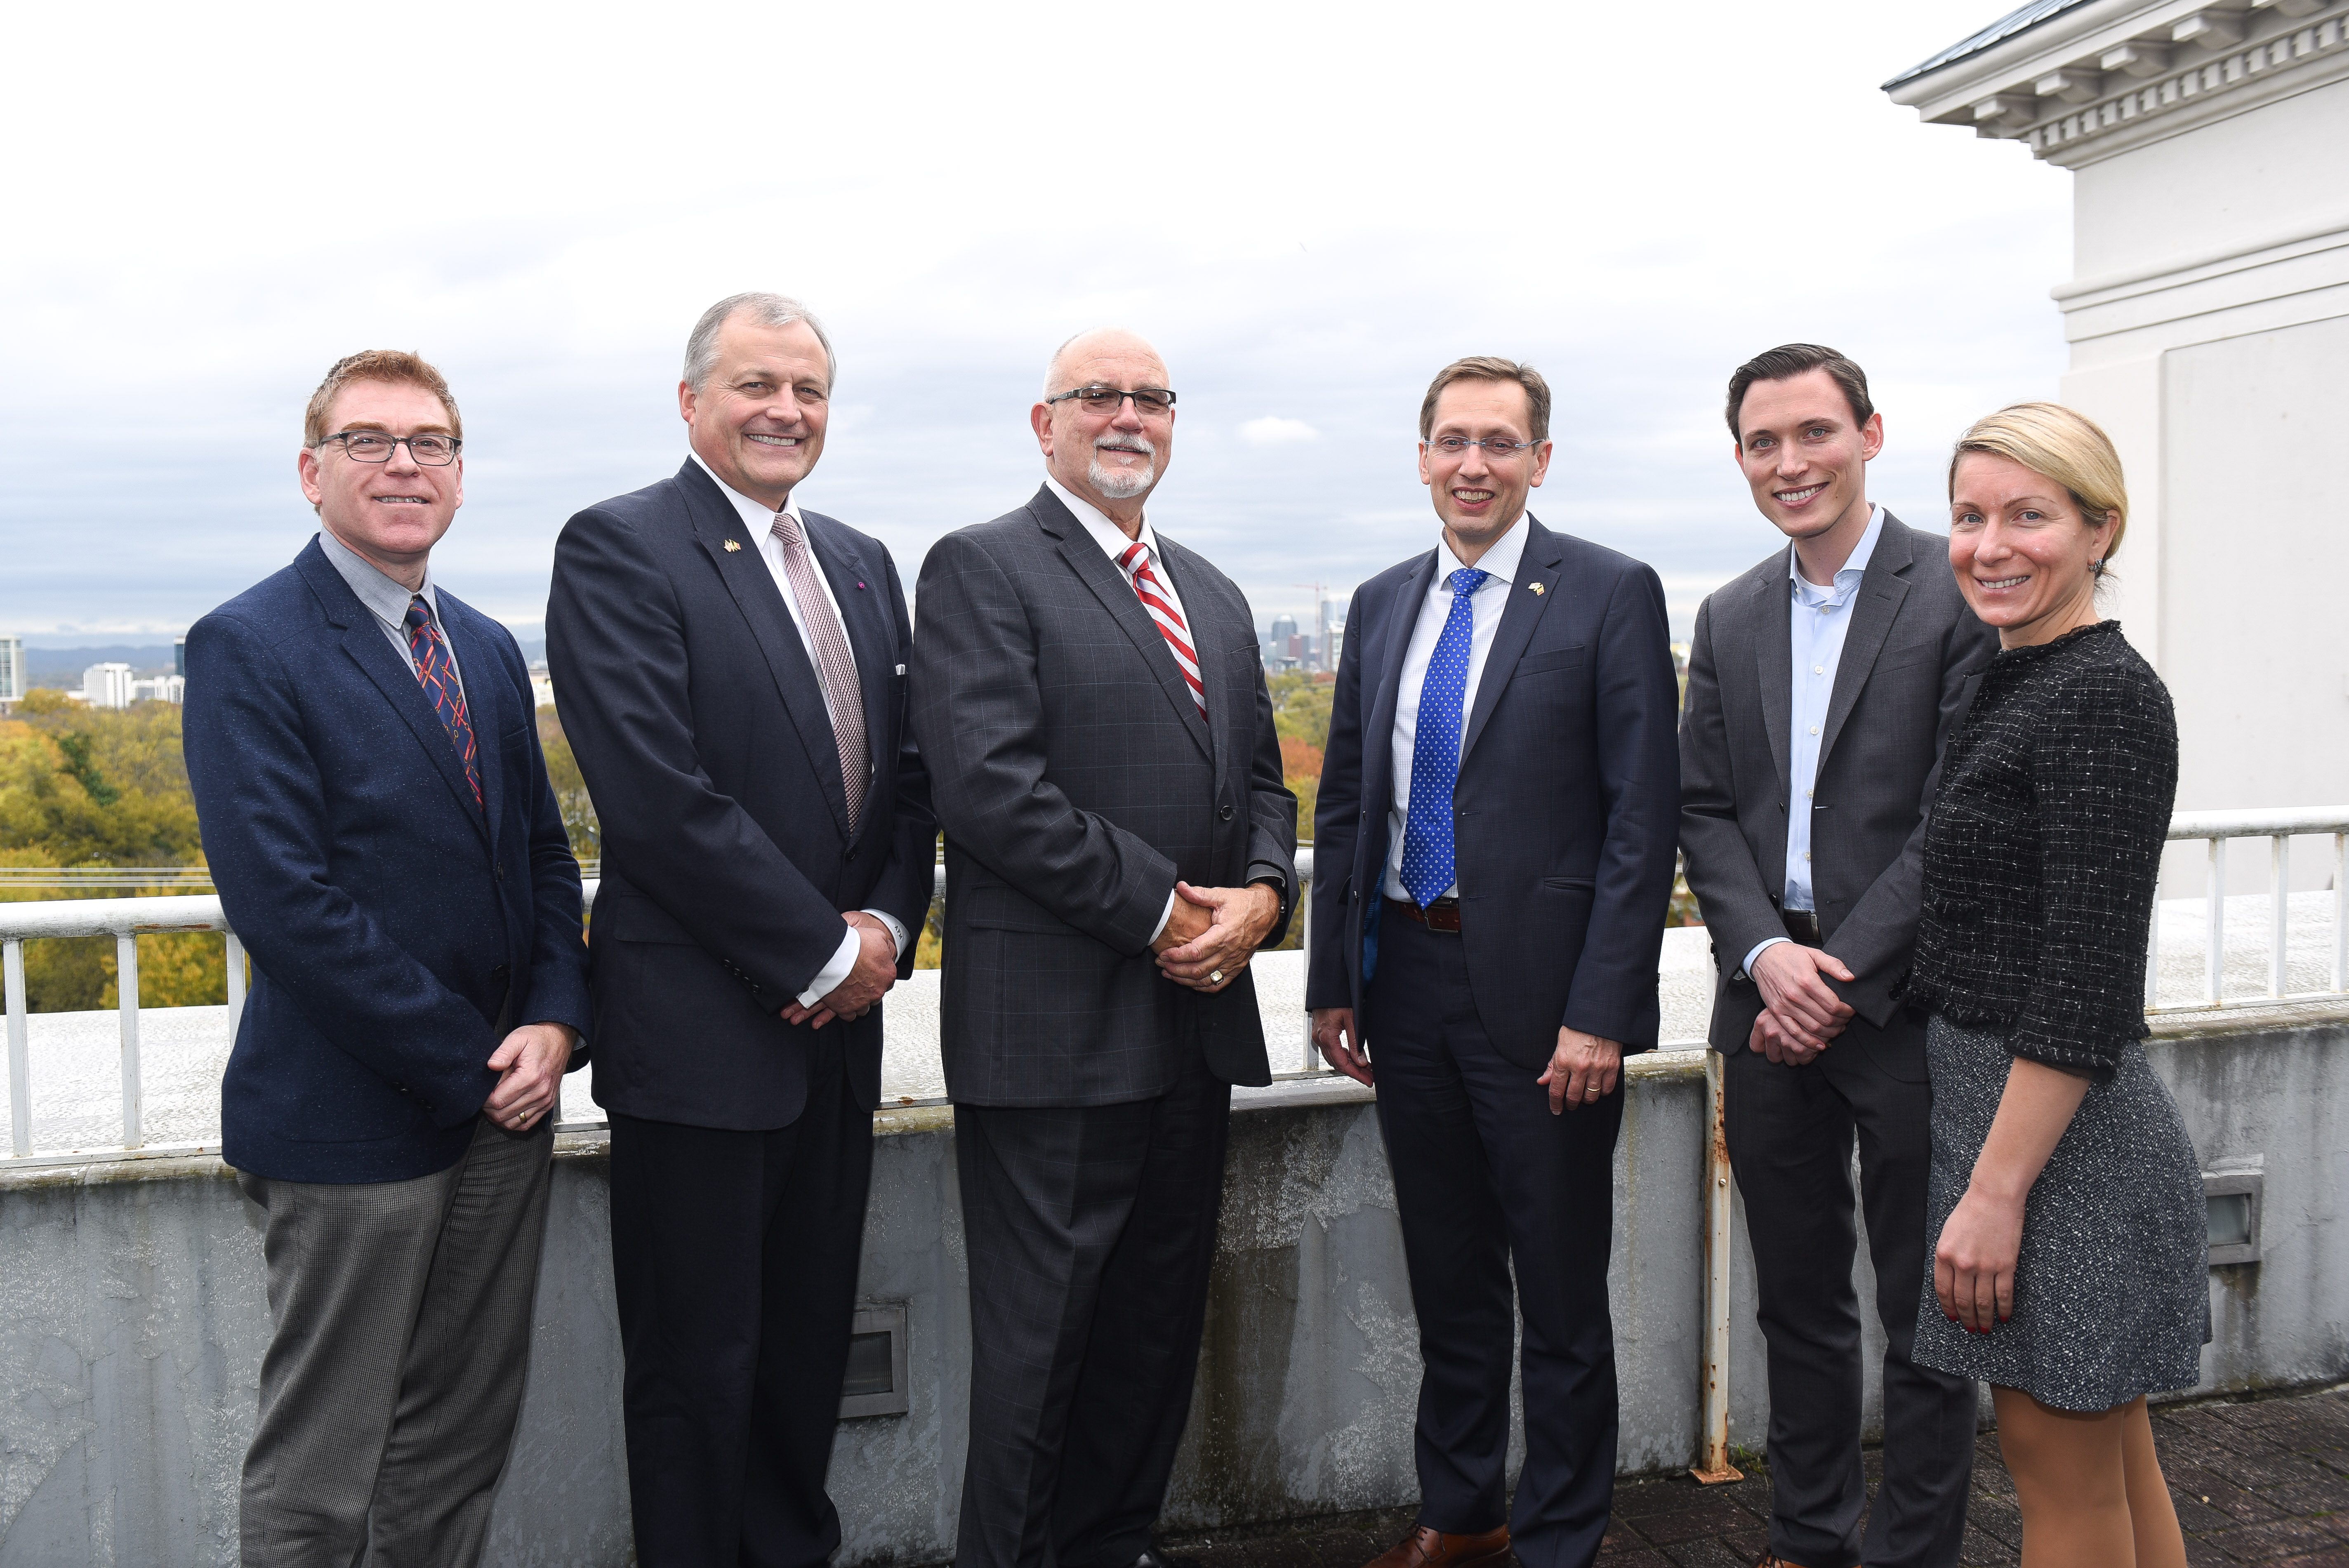 A group of Massey faculty standing on a balcony with the consulate of Belgium